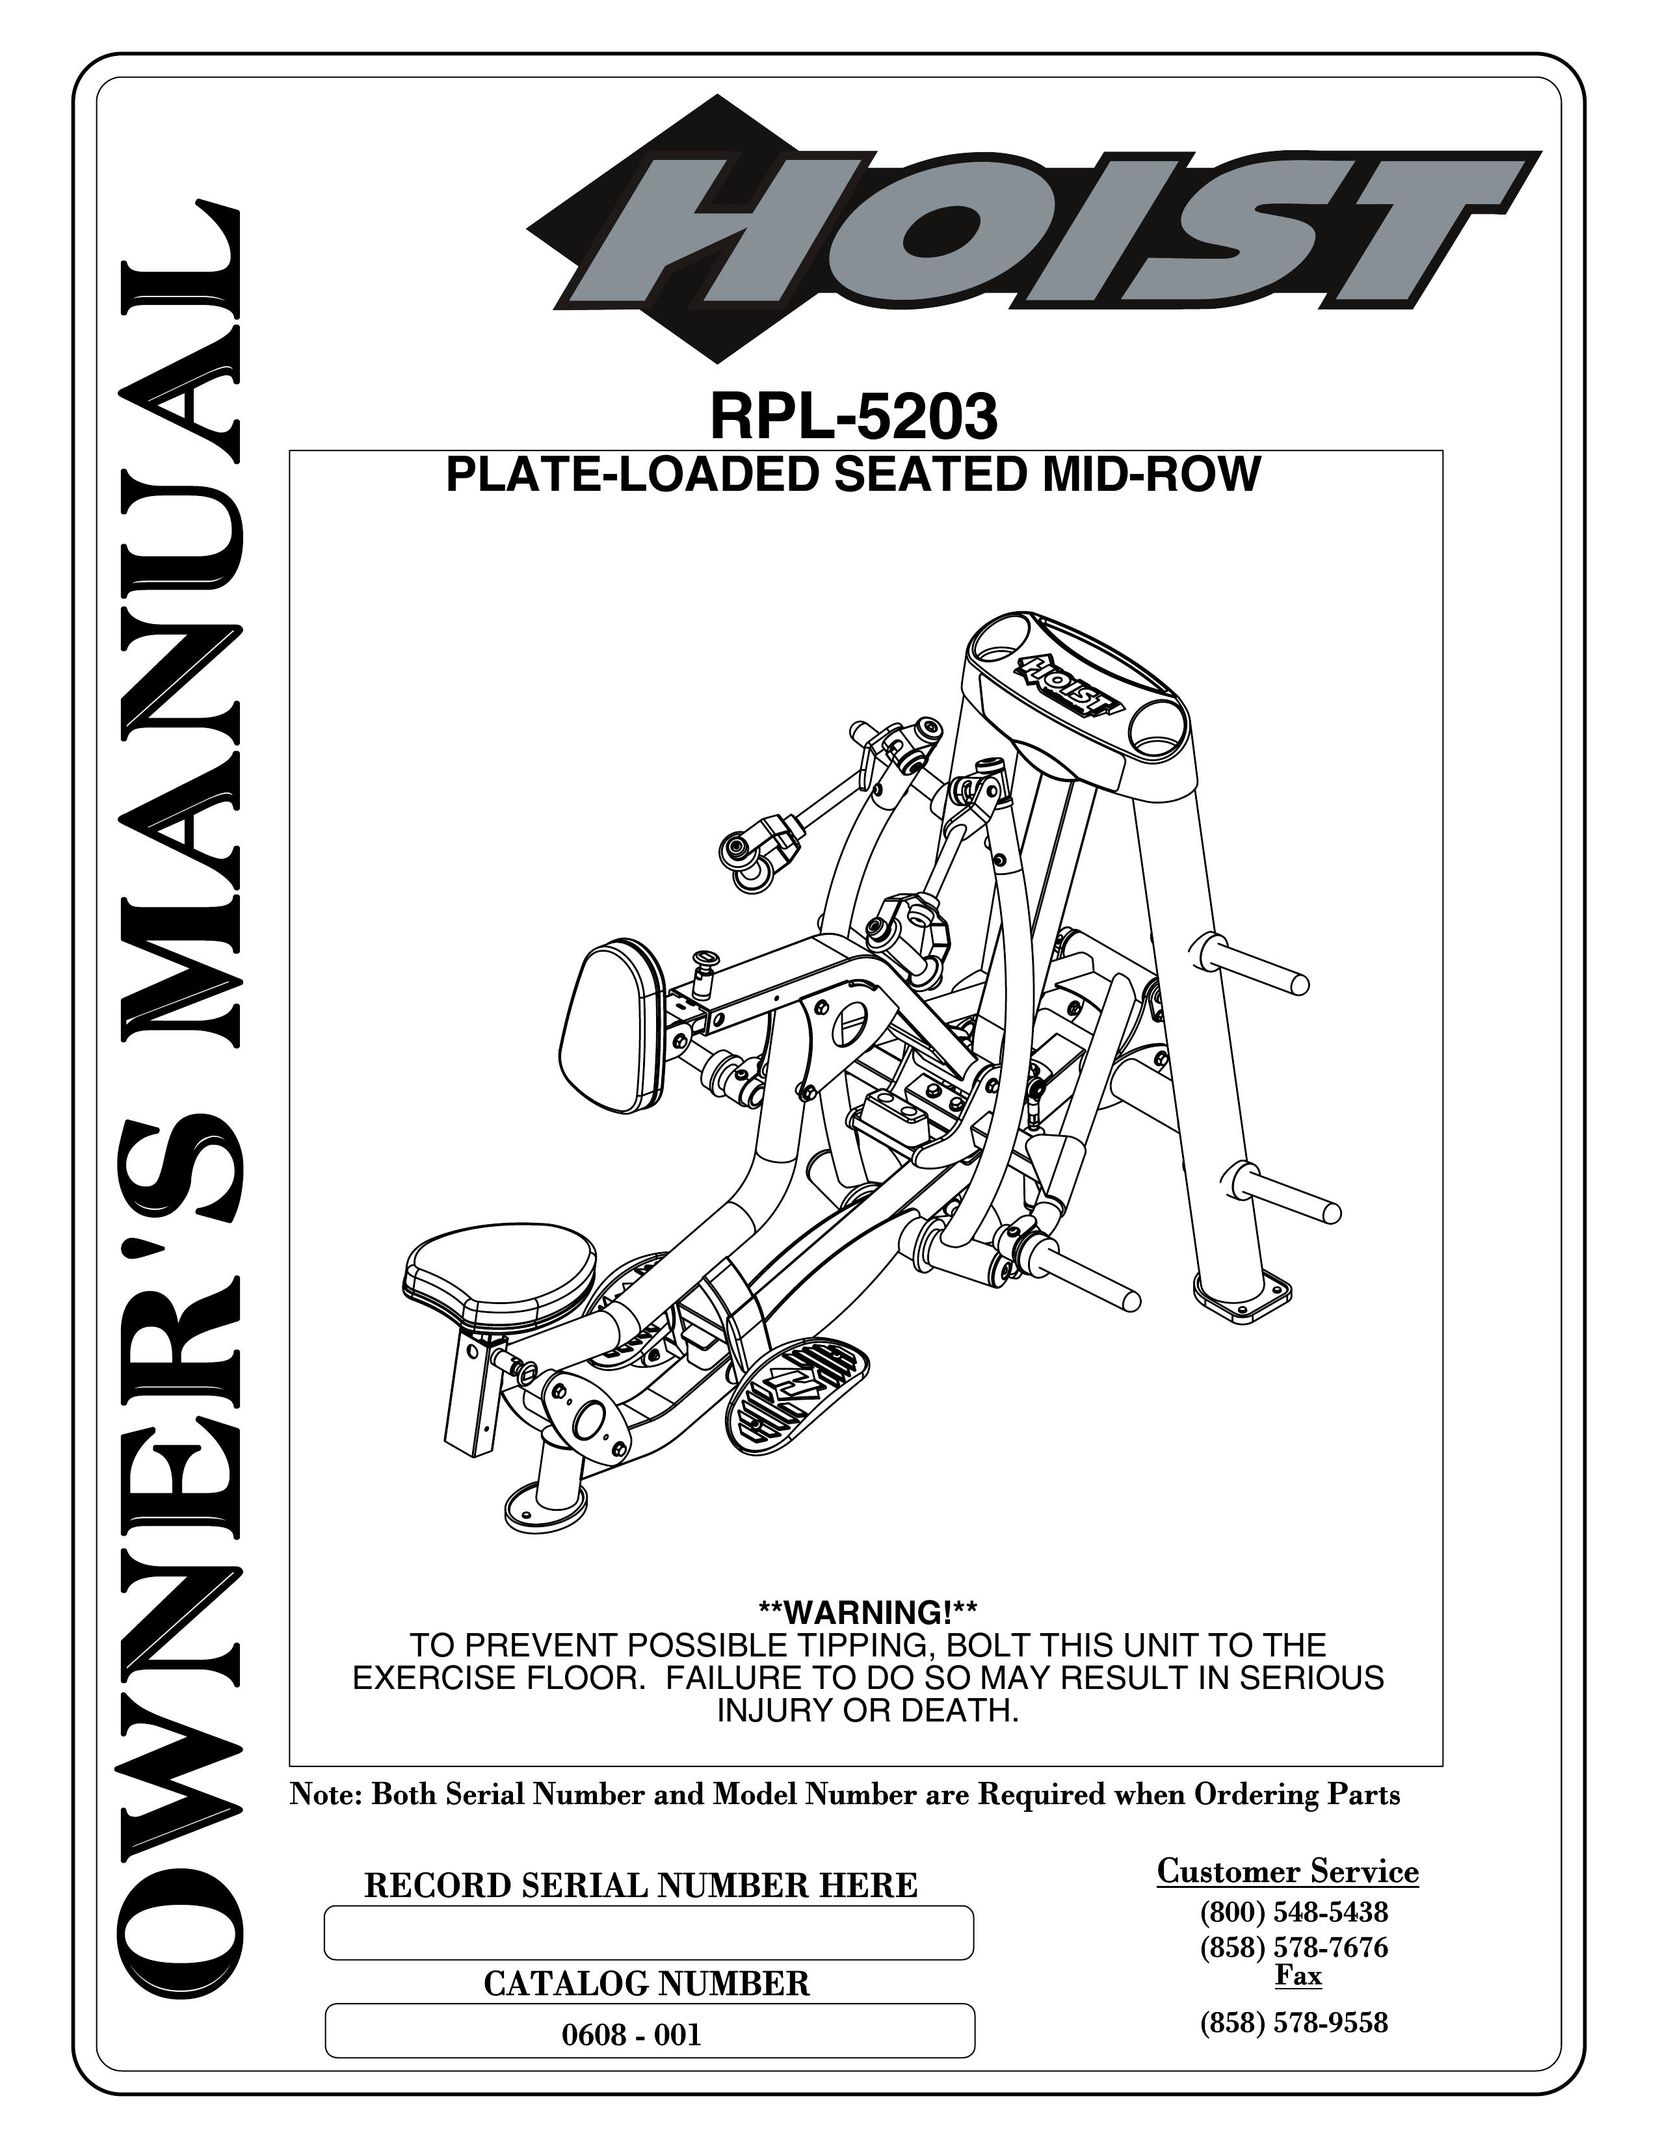 Hoist Fitness rpl-5203 Bicycle Accessories User Manual